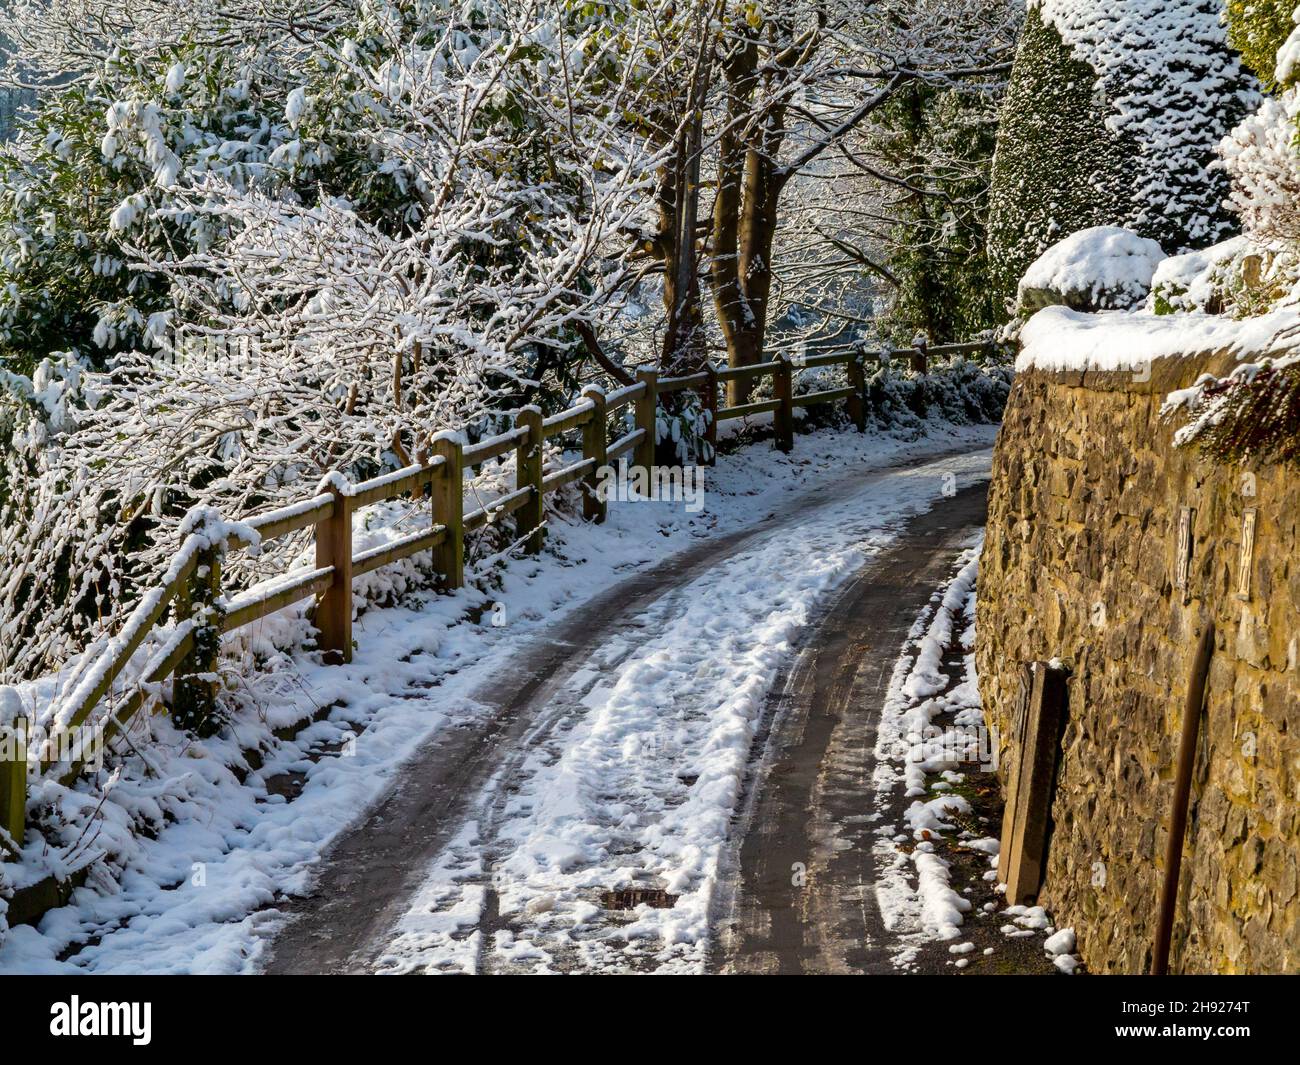 Snow covered road with trees at Matlock Bath in the Derbyshire Peak District England UK with tyre tracks visible in the snow. Stock Photo